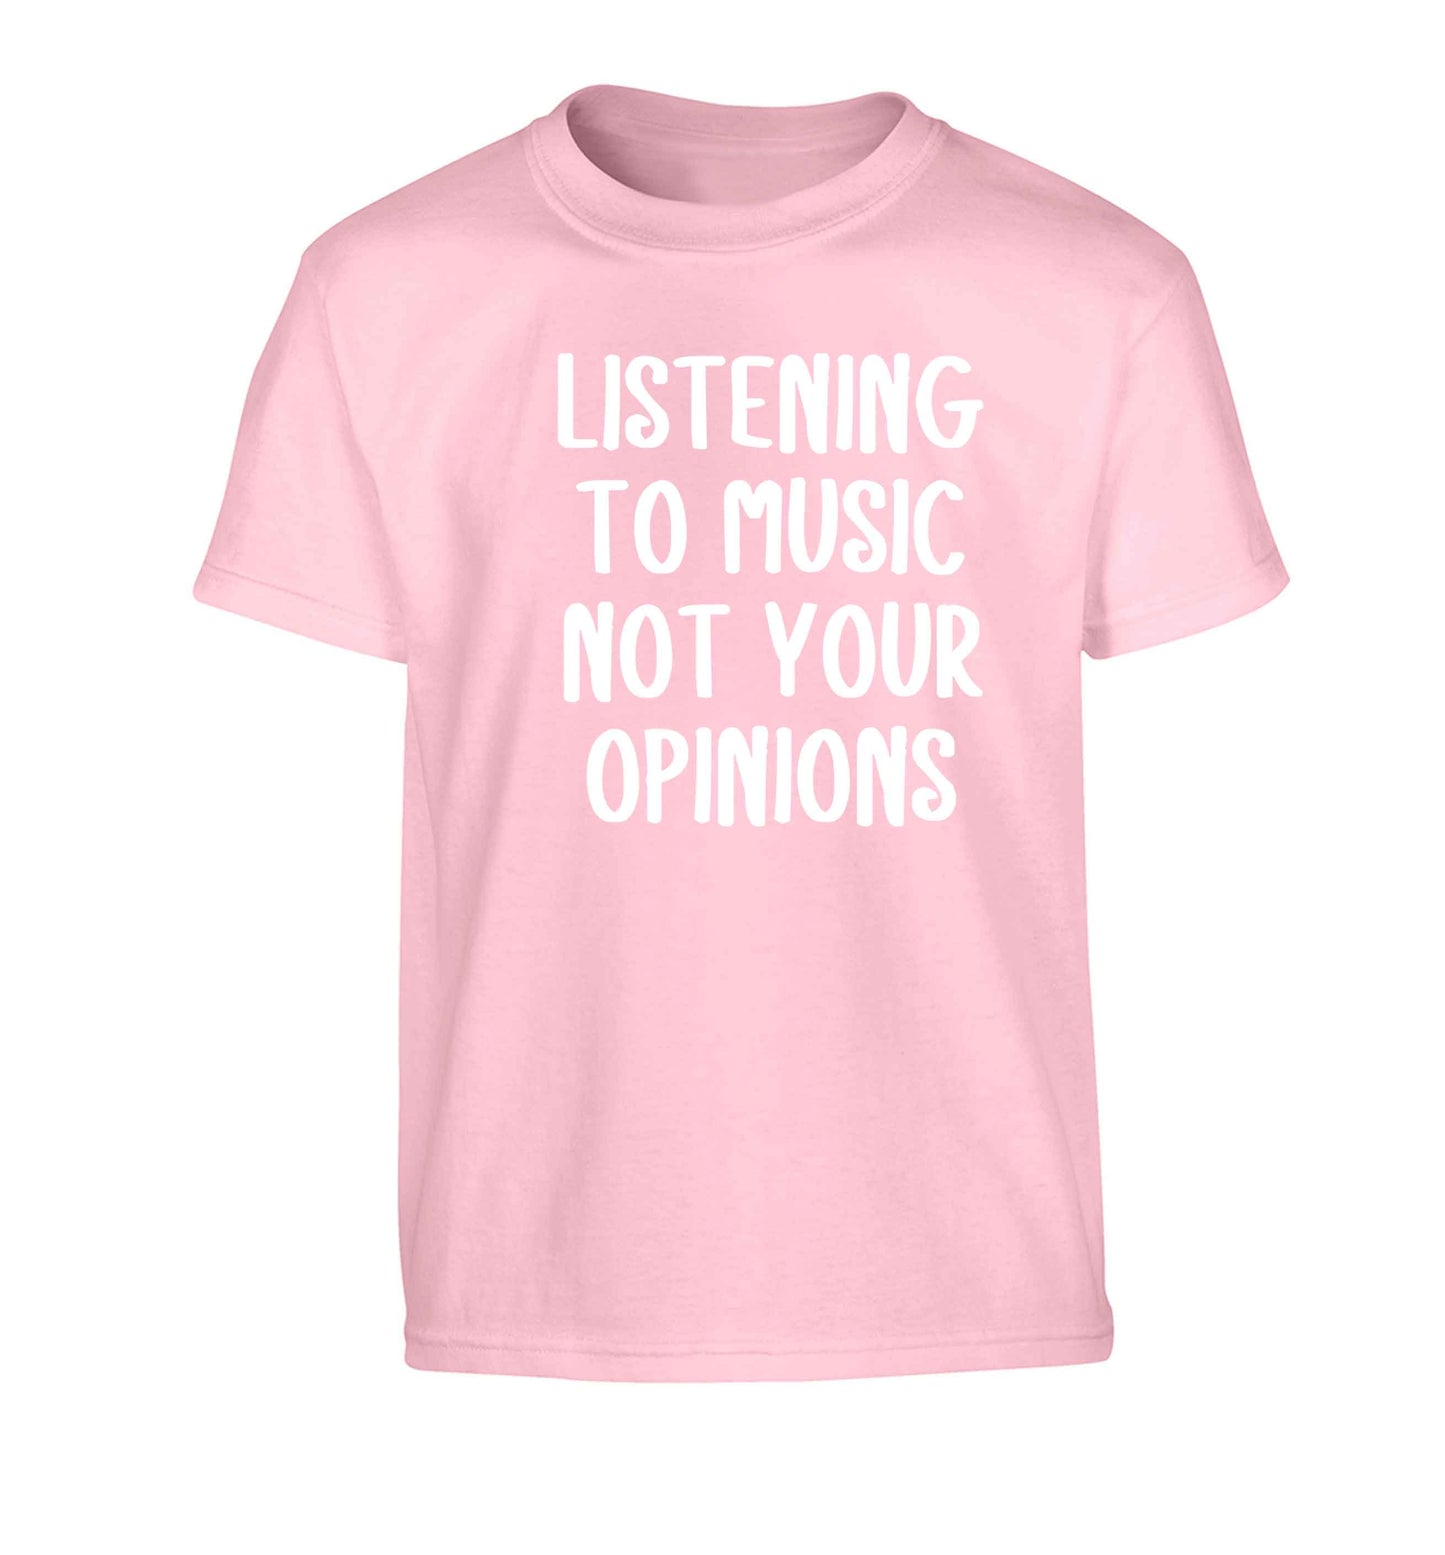 Listening to music not your opinions Children's light pink Tshirt 12-13 Years